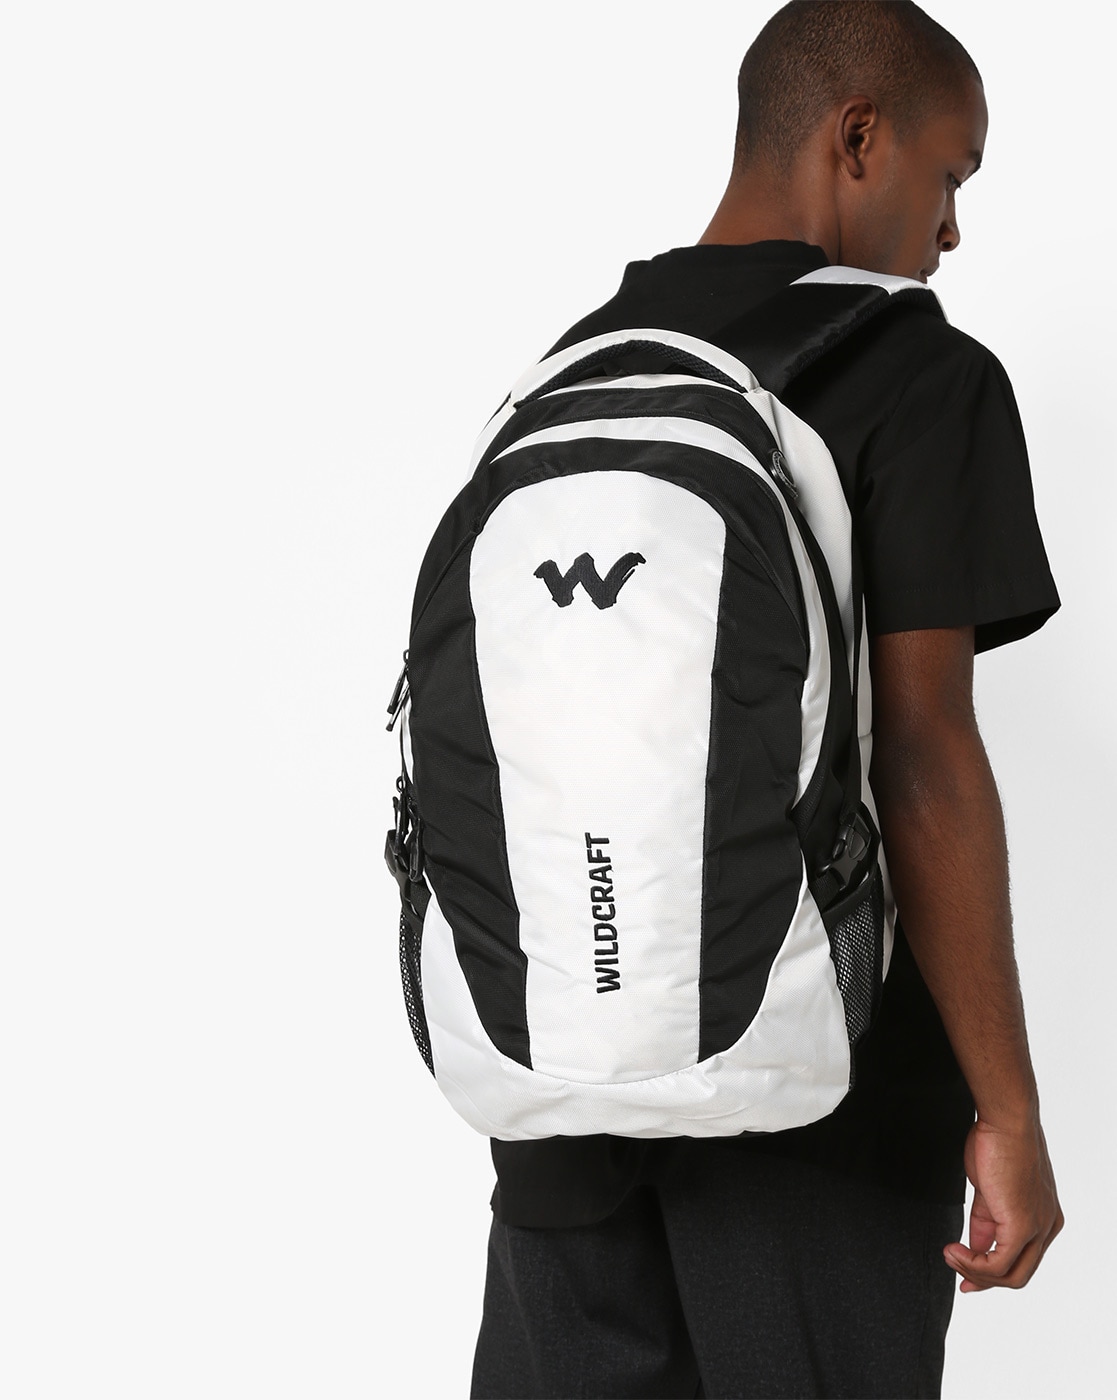 Wildcraft Women Black  White Graphic Backpack Price in India Full  Specifications  Offers  DTashioncom